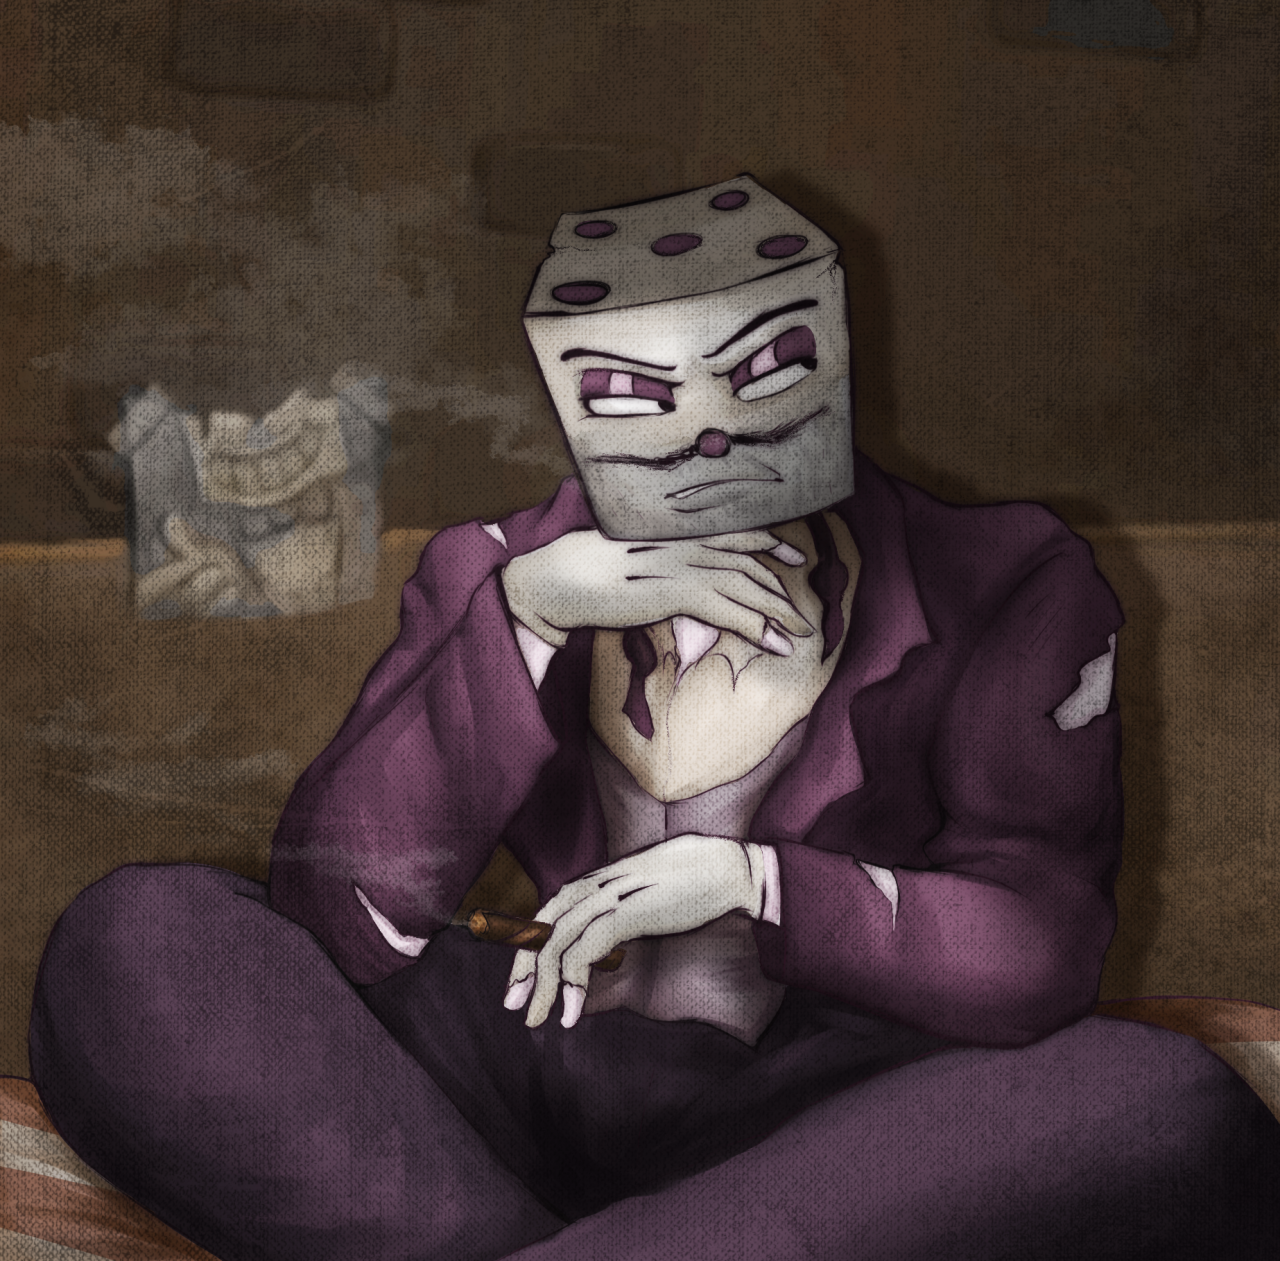 Purple Whore — King Dice in his hobo era, still hot af it's